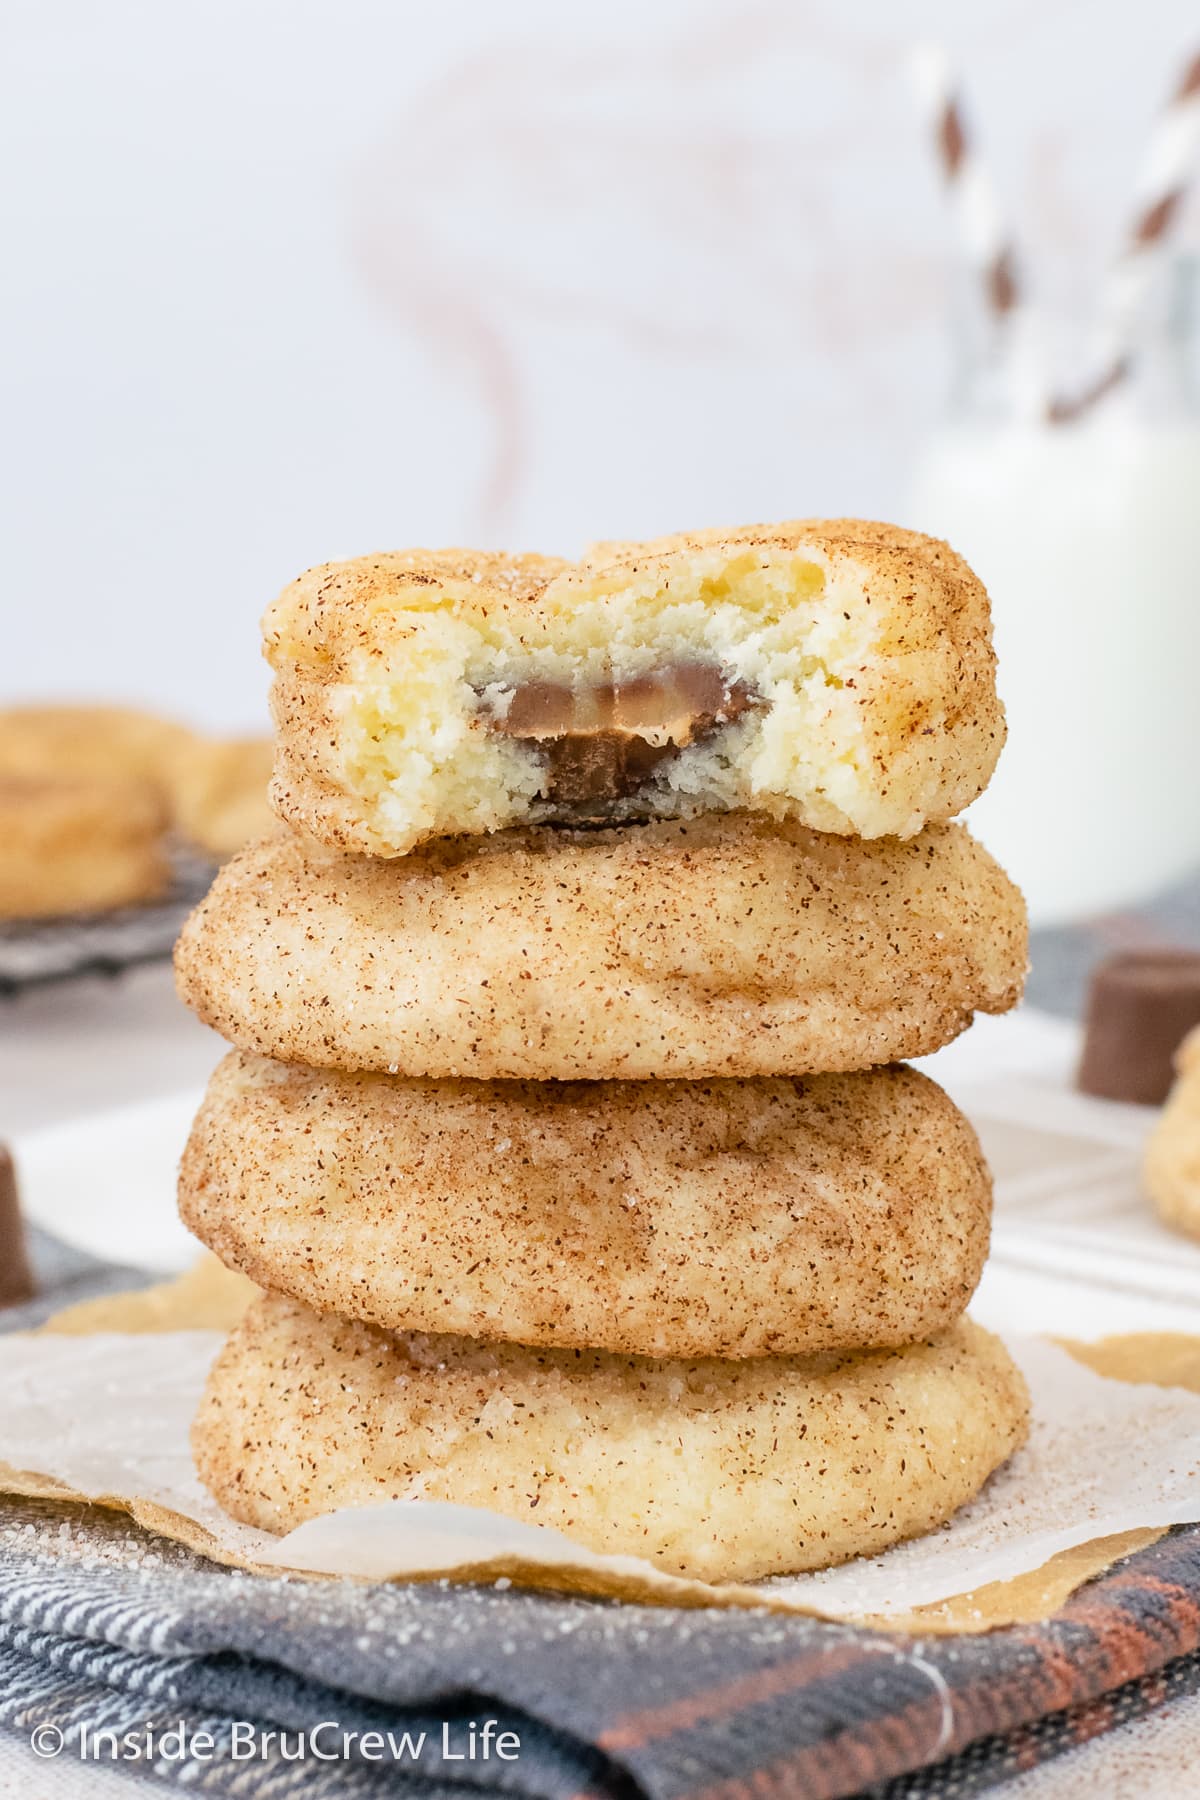 A stack of cinnamon sugar cookies stuffed with caramel candies on a towel.